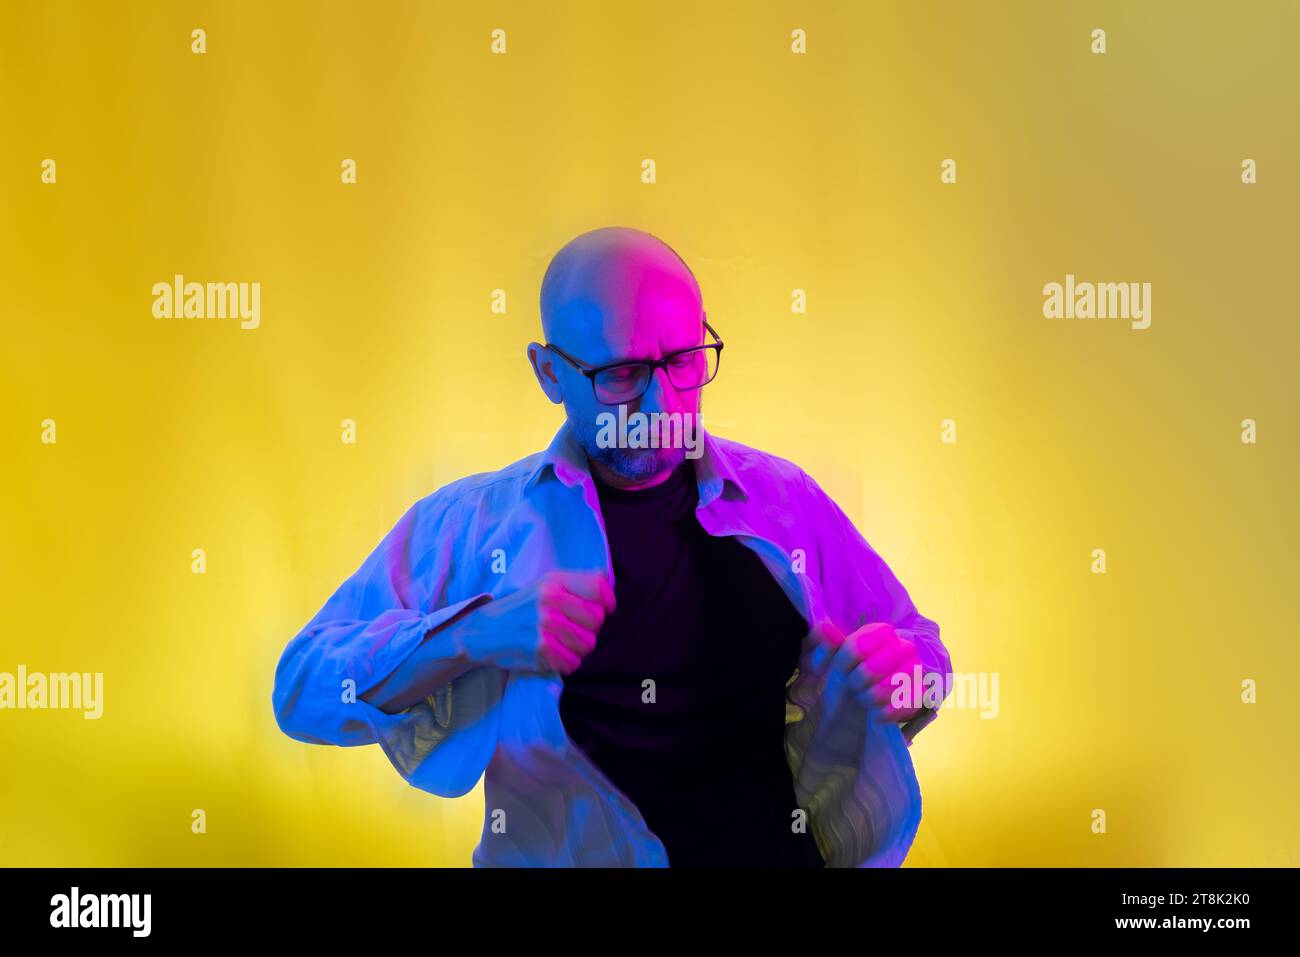 Bearded, bald man with glasses opening his shirt. Isolated on yellow background. Stock Photo